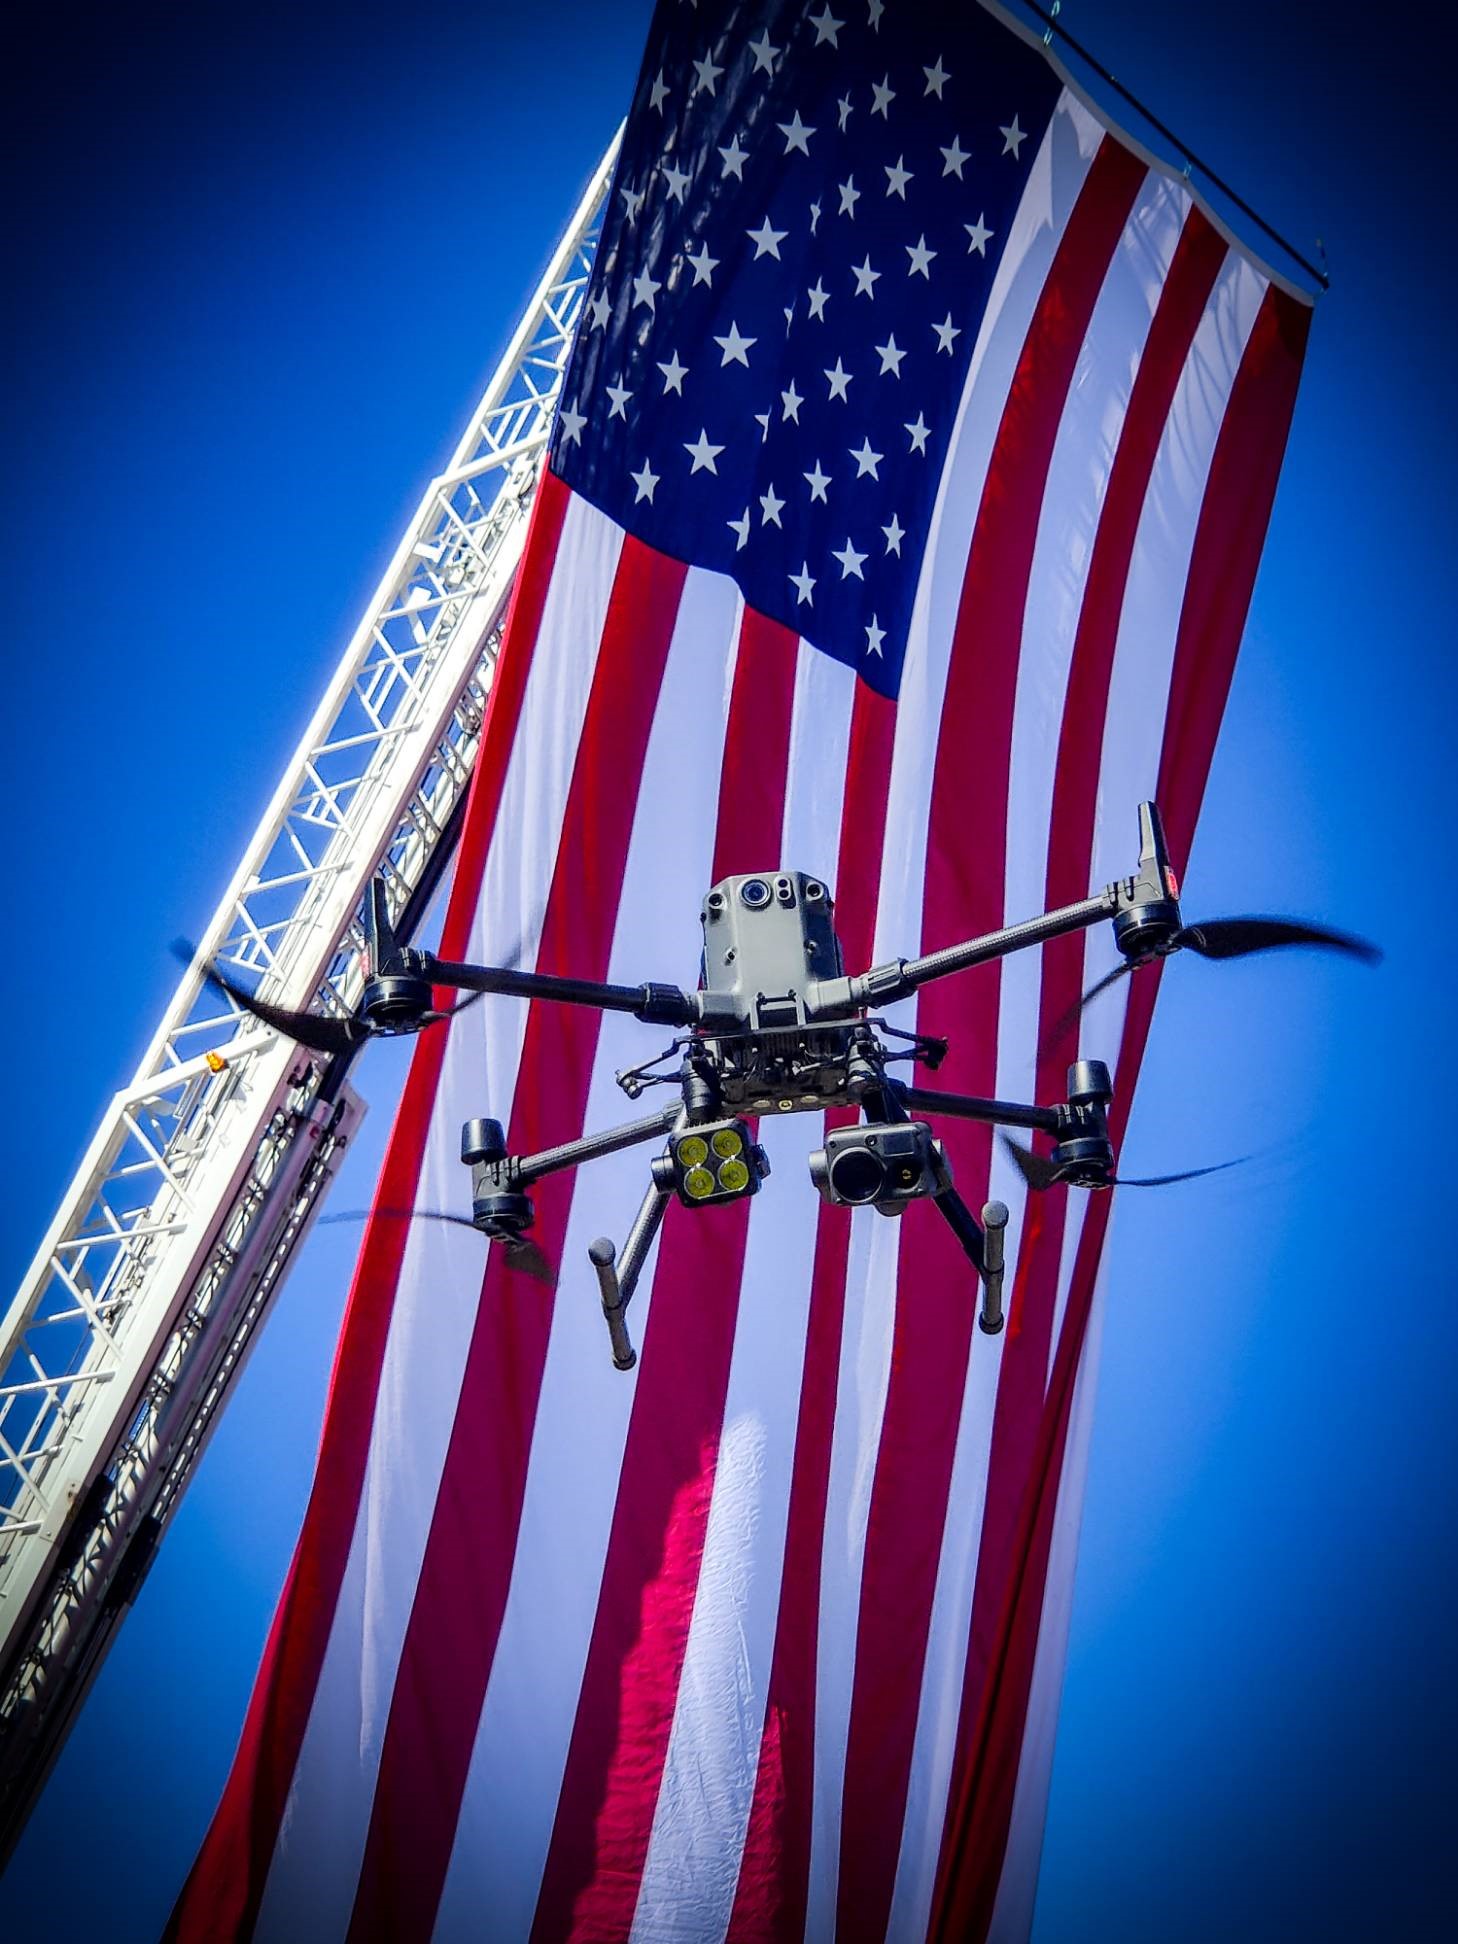 A photo of an uncrewed aircraft system hovering in front of an American flag mounted on the top of a fire truck's extended ladder.